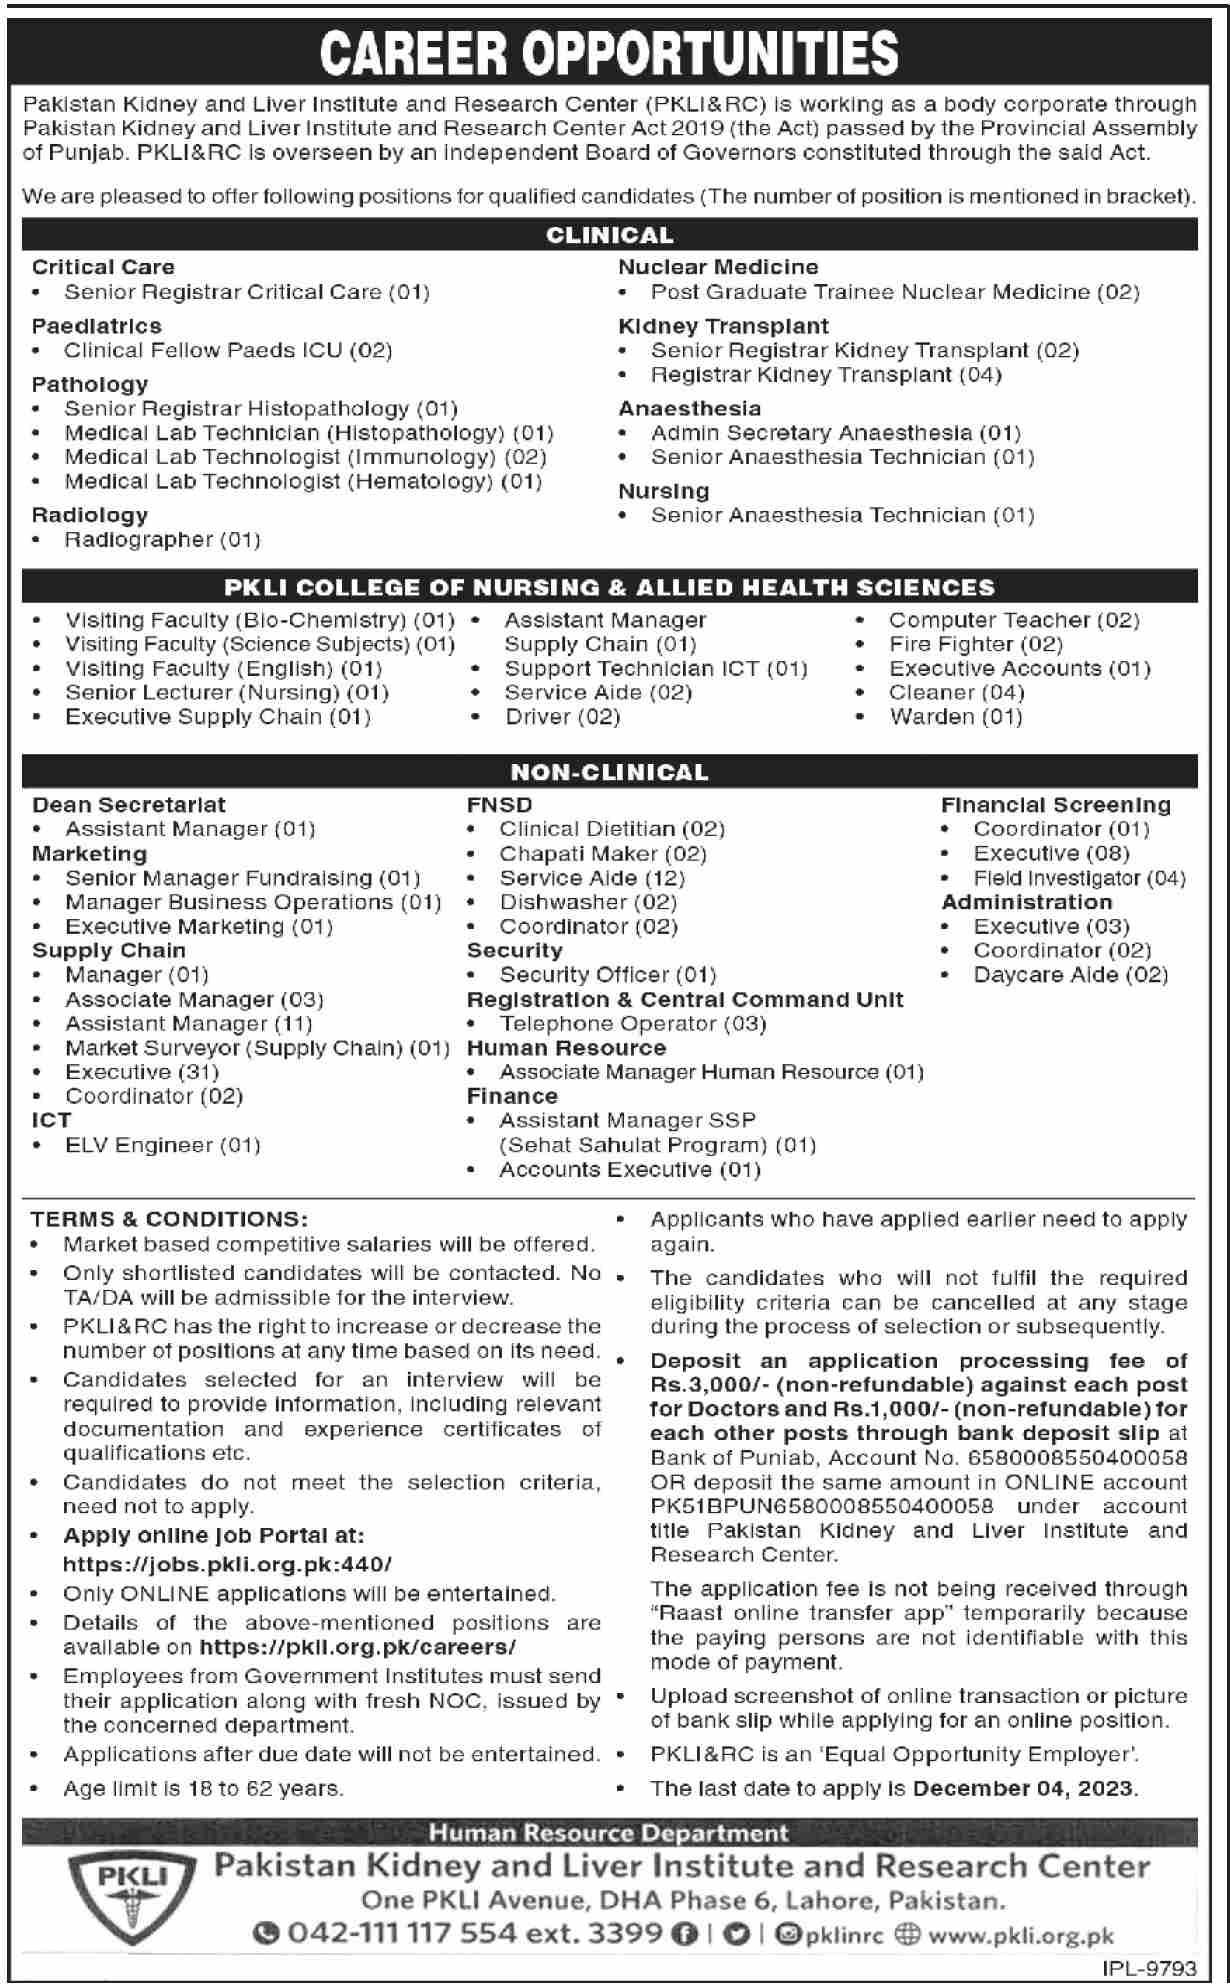 Positions Available At The Pakistan Kidney and Liver Center - techznet